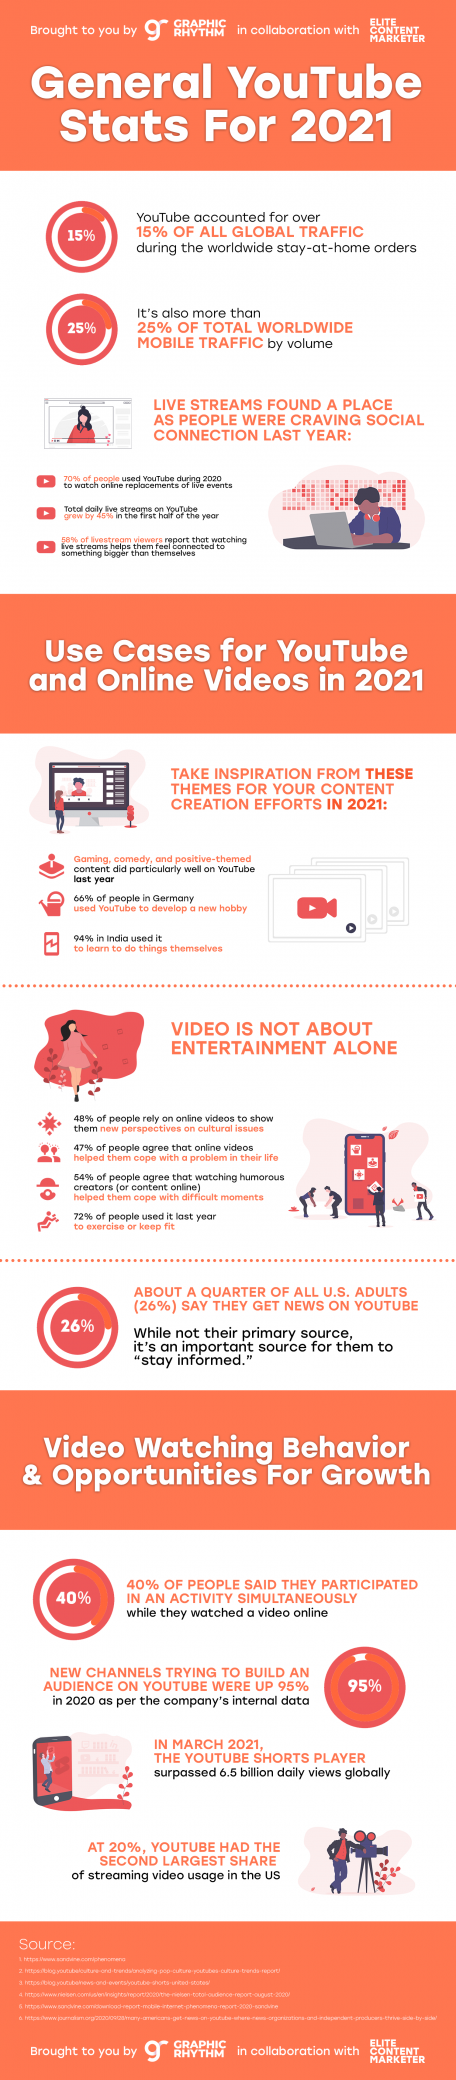 State of YouTube In 2021 [Infographic]